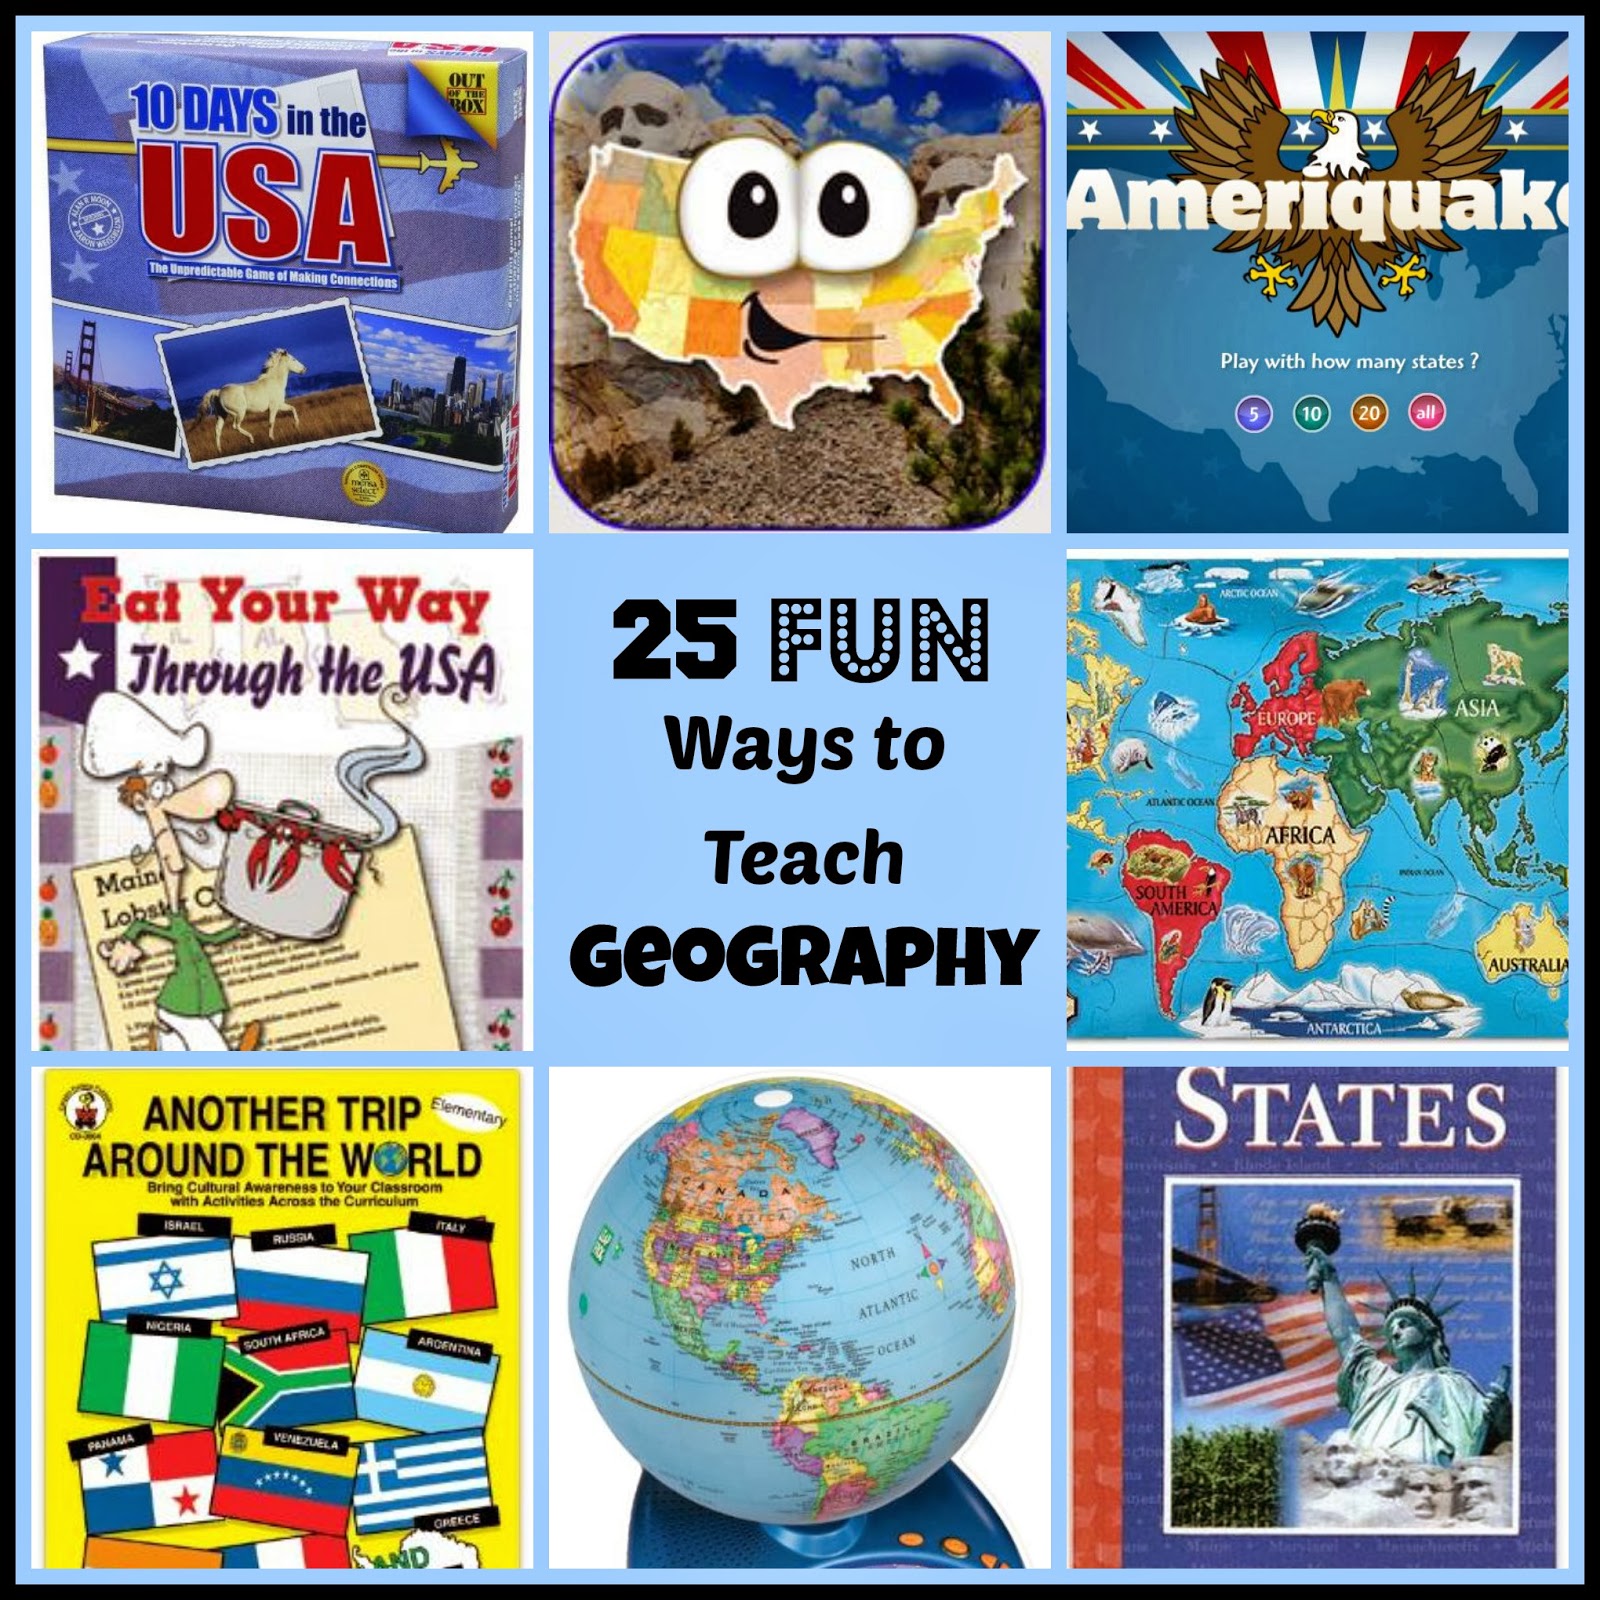 school  elementary geography  resources geography students  lessonsfree 8,000 has lesson plans Fromedhelper high